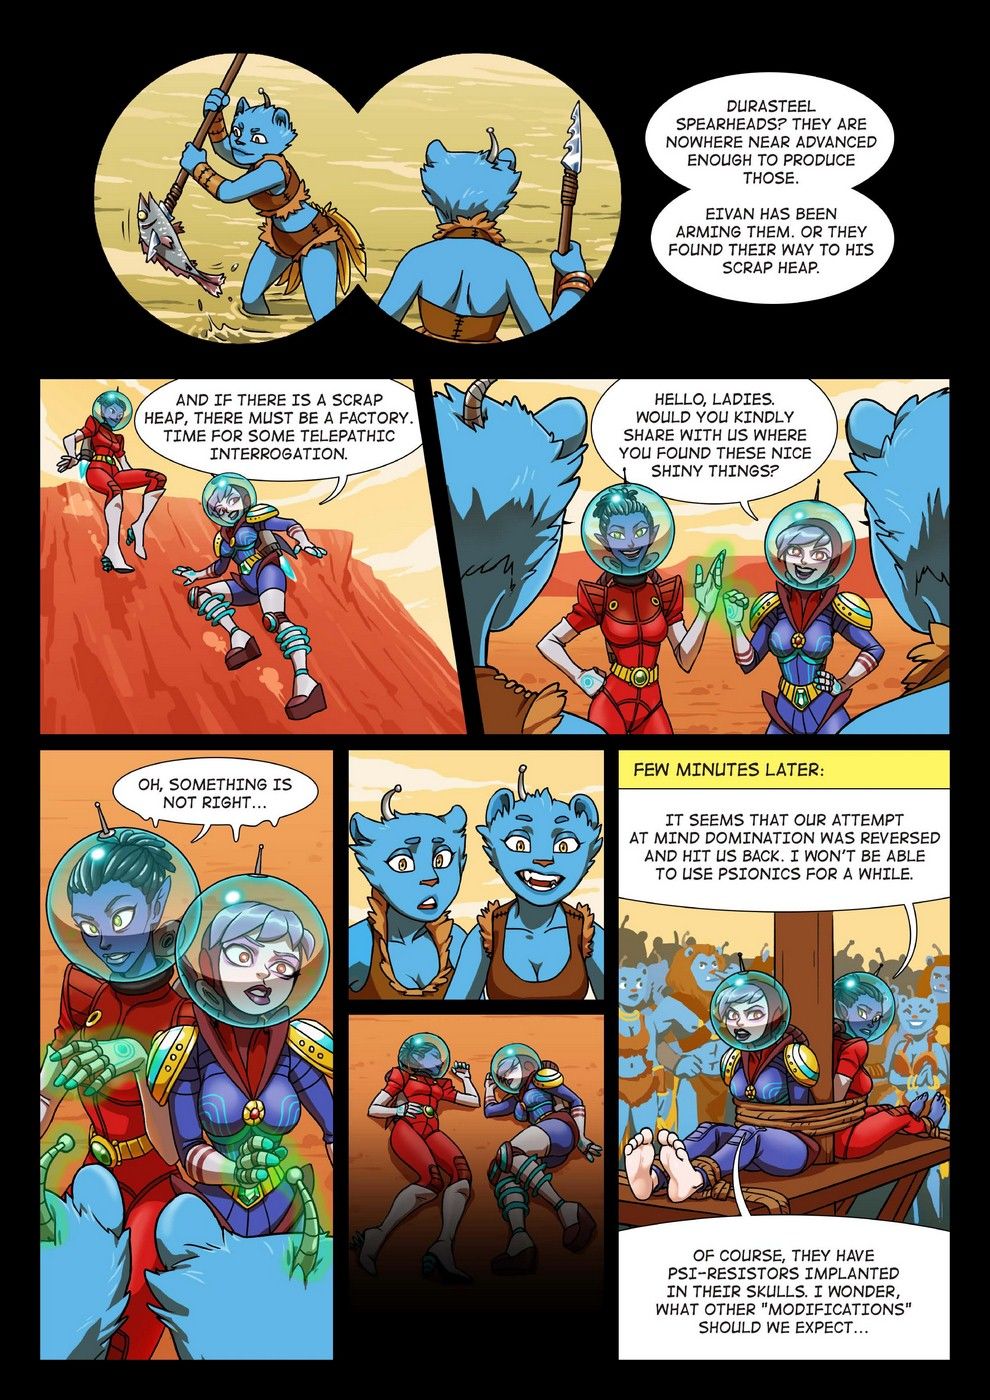 Adventures of the Brave Rangers - PawFeather page 3